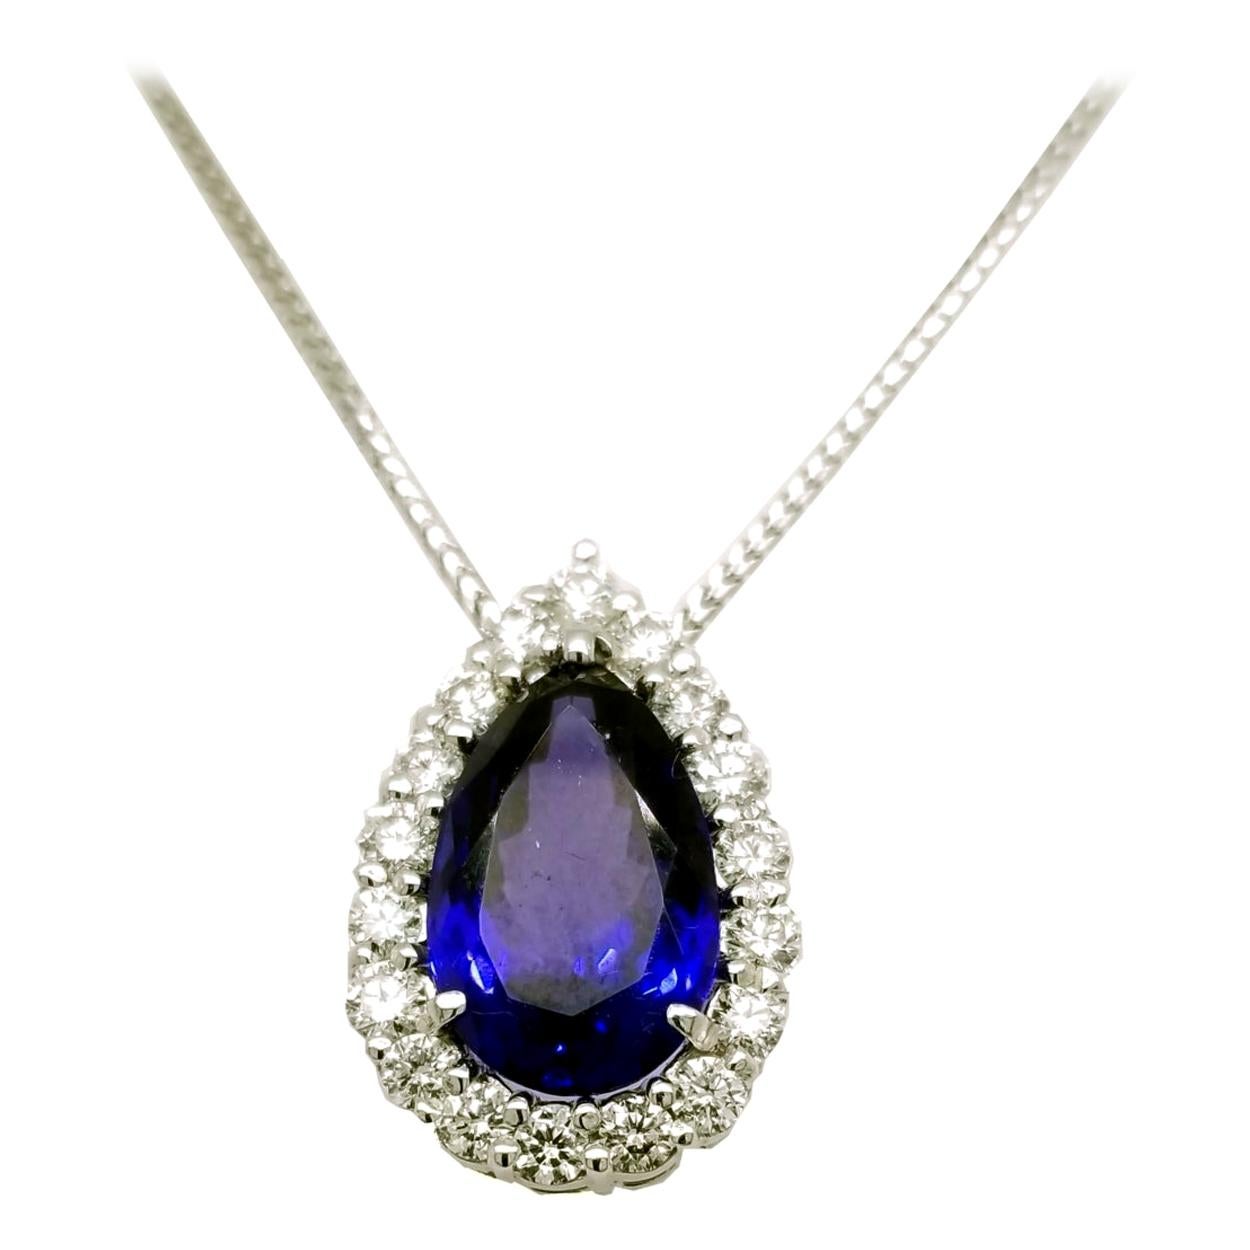 GIA Certified 7.78 Carat Pear Shaped Tanzanite Necklace with 1.29 Carat Diamonds